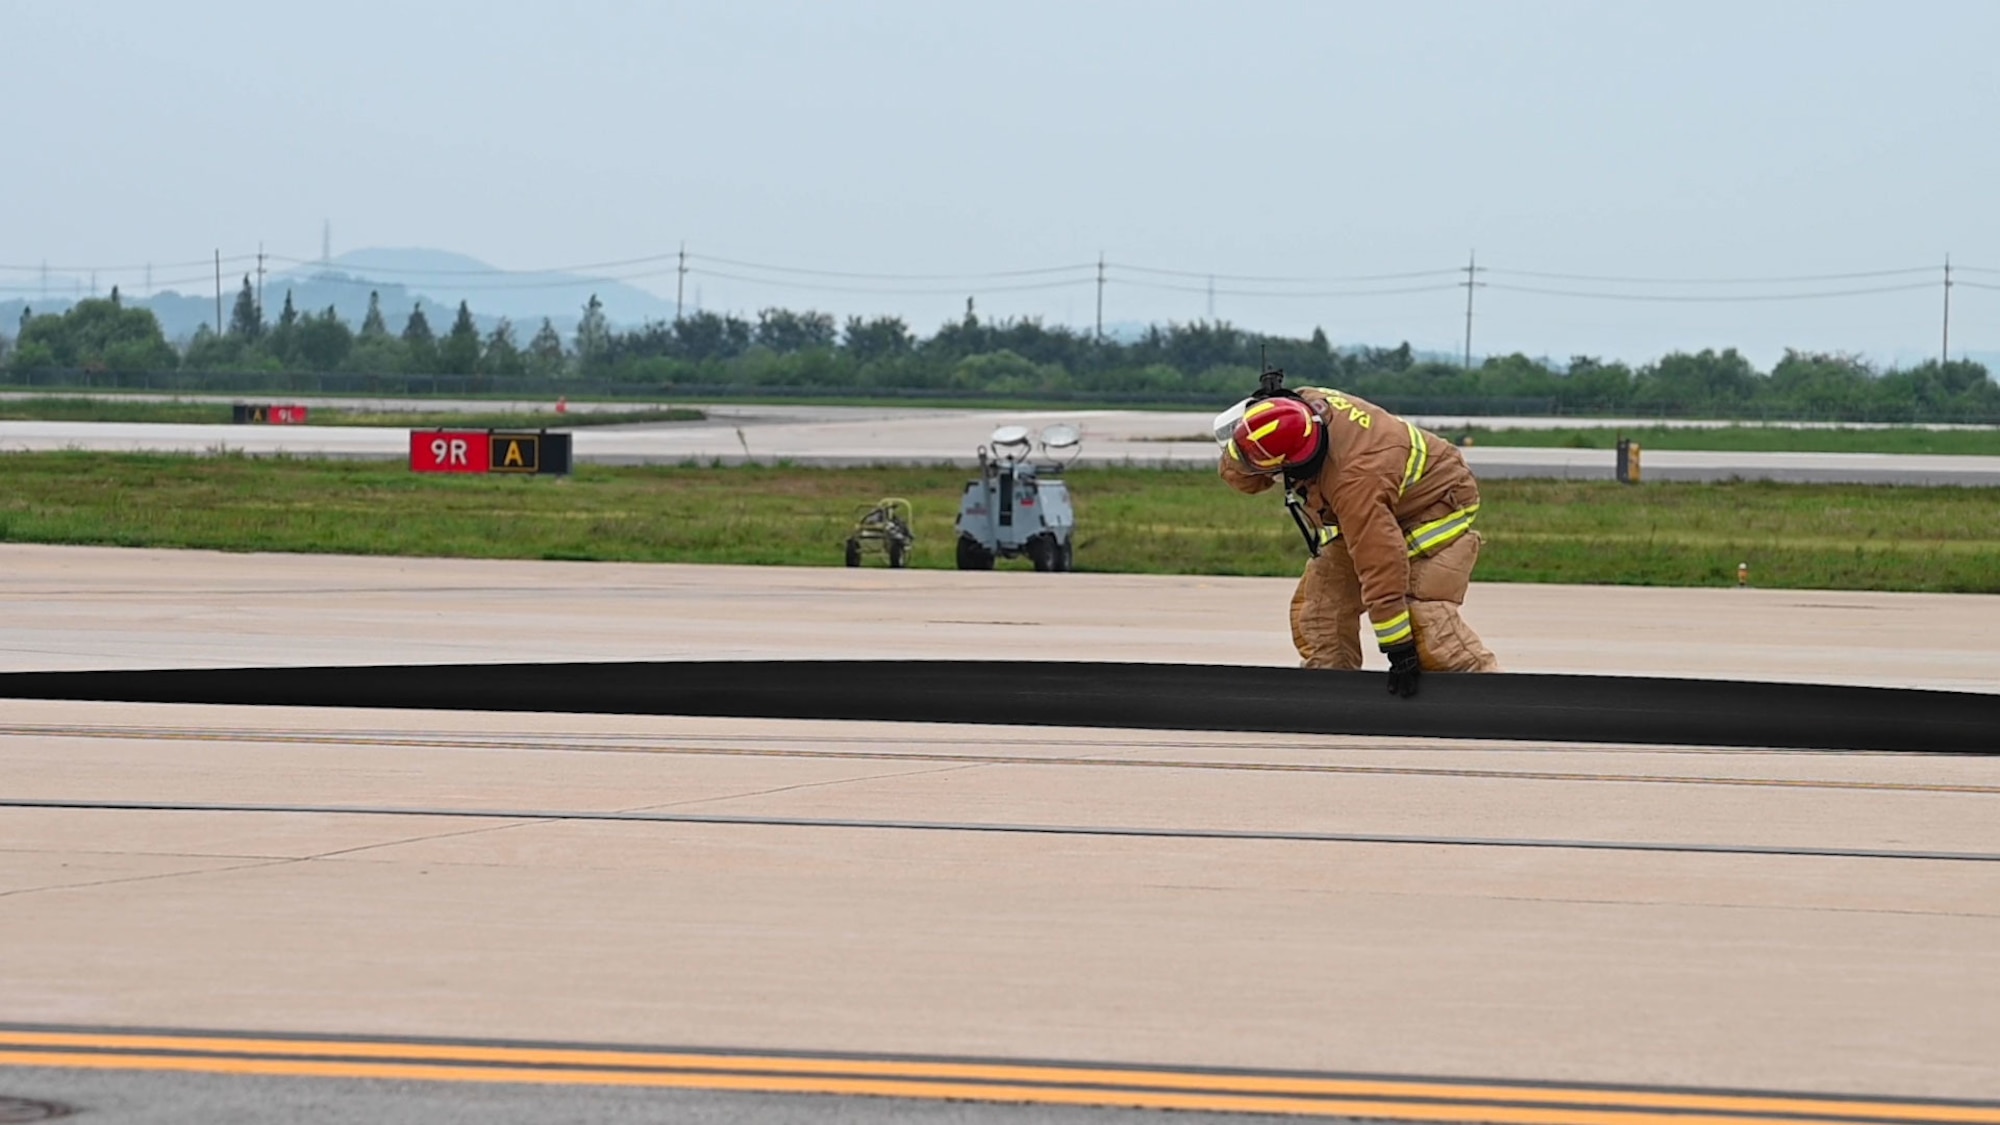 The MAAS reduces the chances of a crash by reducing the time and space required for an aircraft to make a full landing in the event of a damaged flightline.